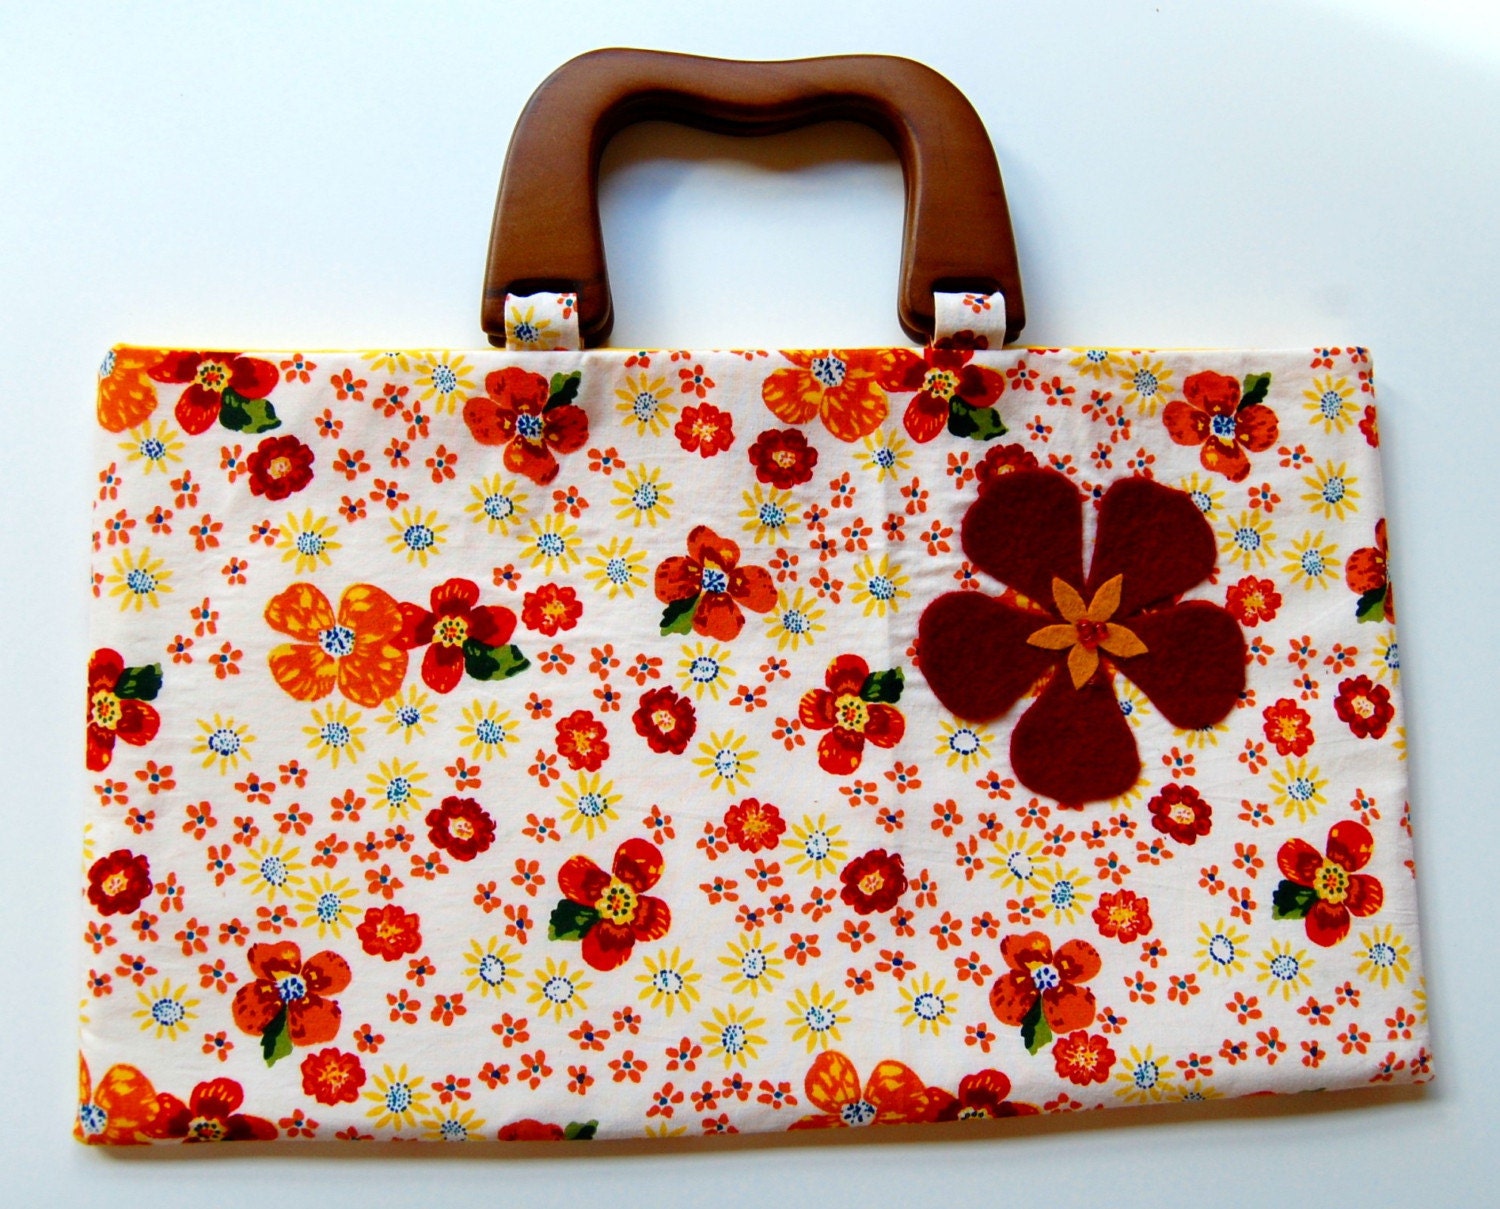 Wooden handle purse with scattered flowers